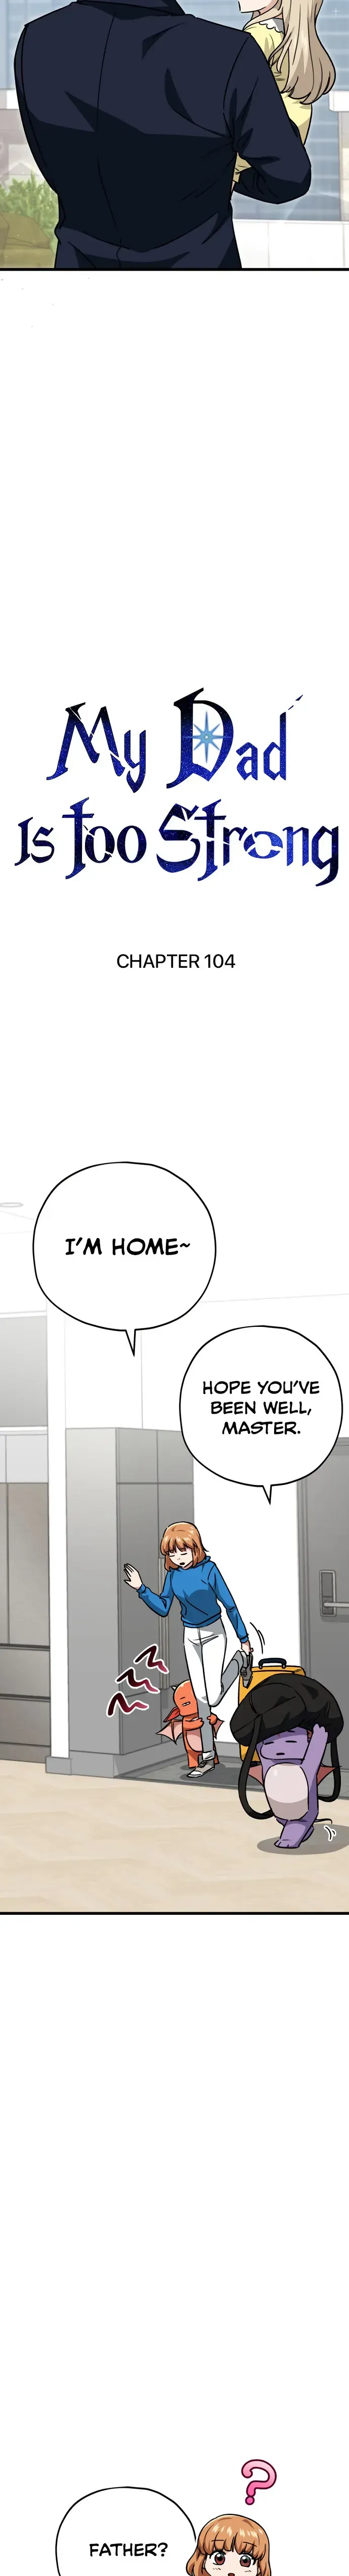 My Dad Is Too Strong Chapter 104 page 16 - MangaWeebs.in